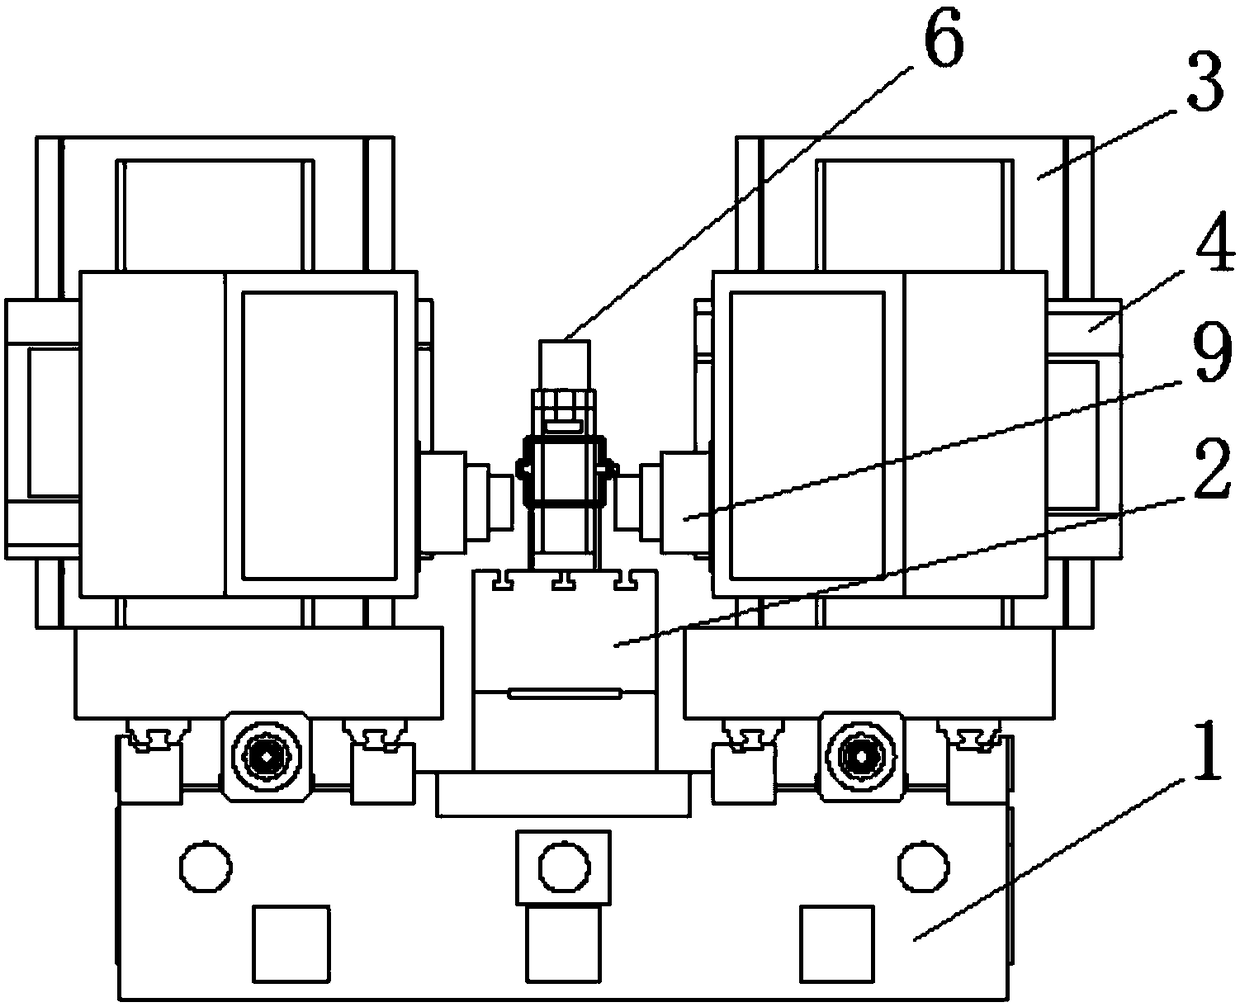 Double-surface milling machine tool with special three-direction fixing clamp